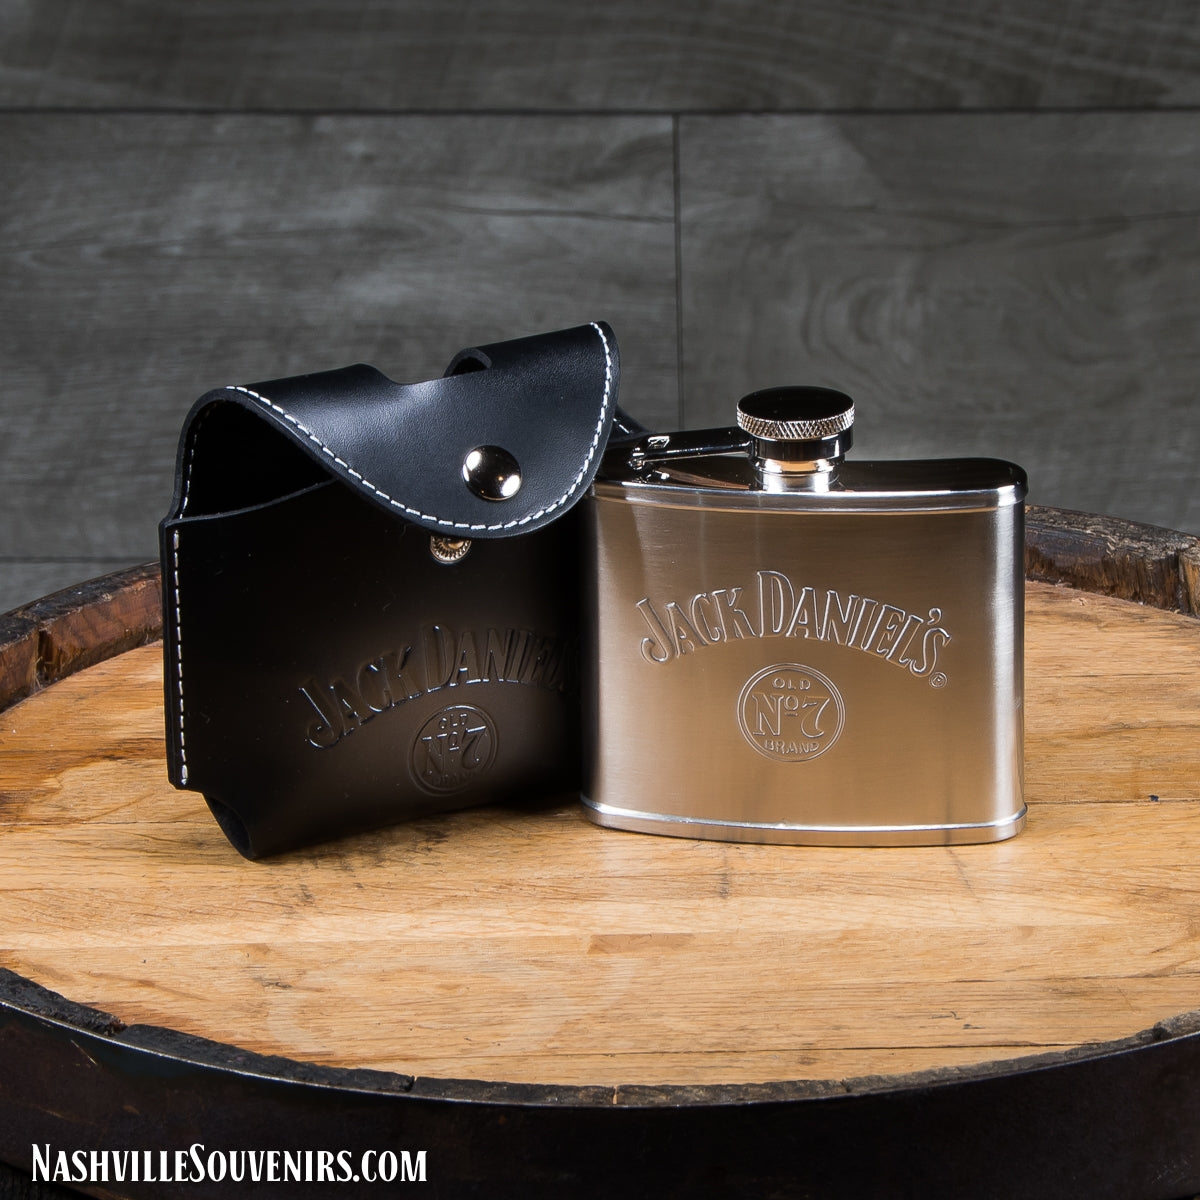 Officially licensed Jack Daniels Stainless Steel and Leather Flask.  FREE SHIPPING on all US orders over $75!